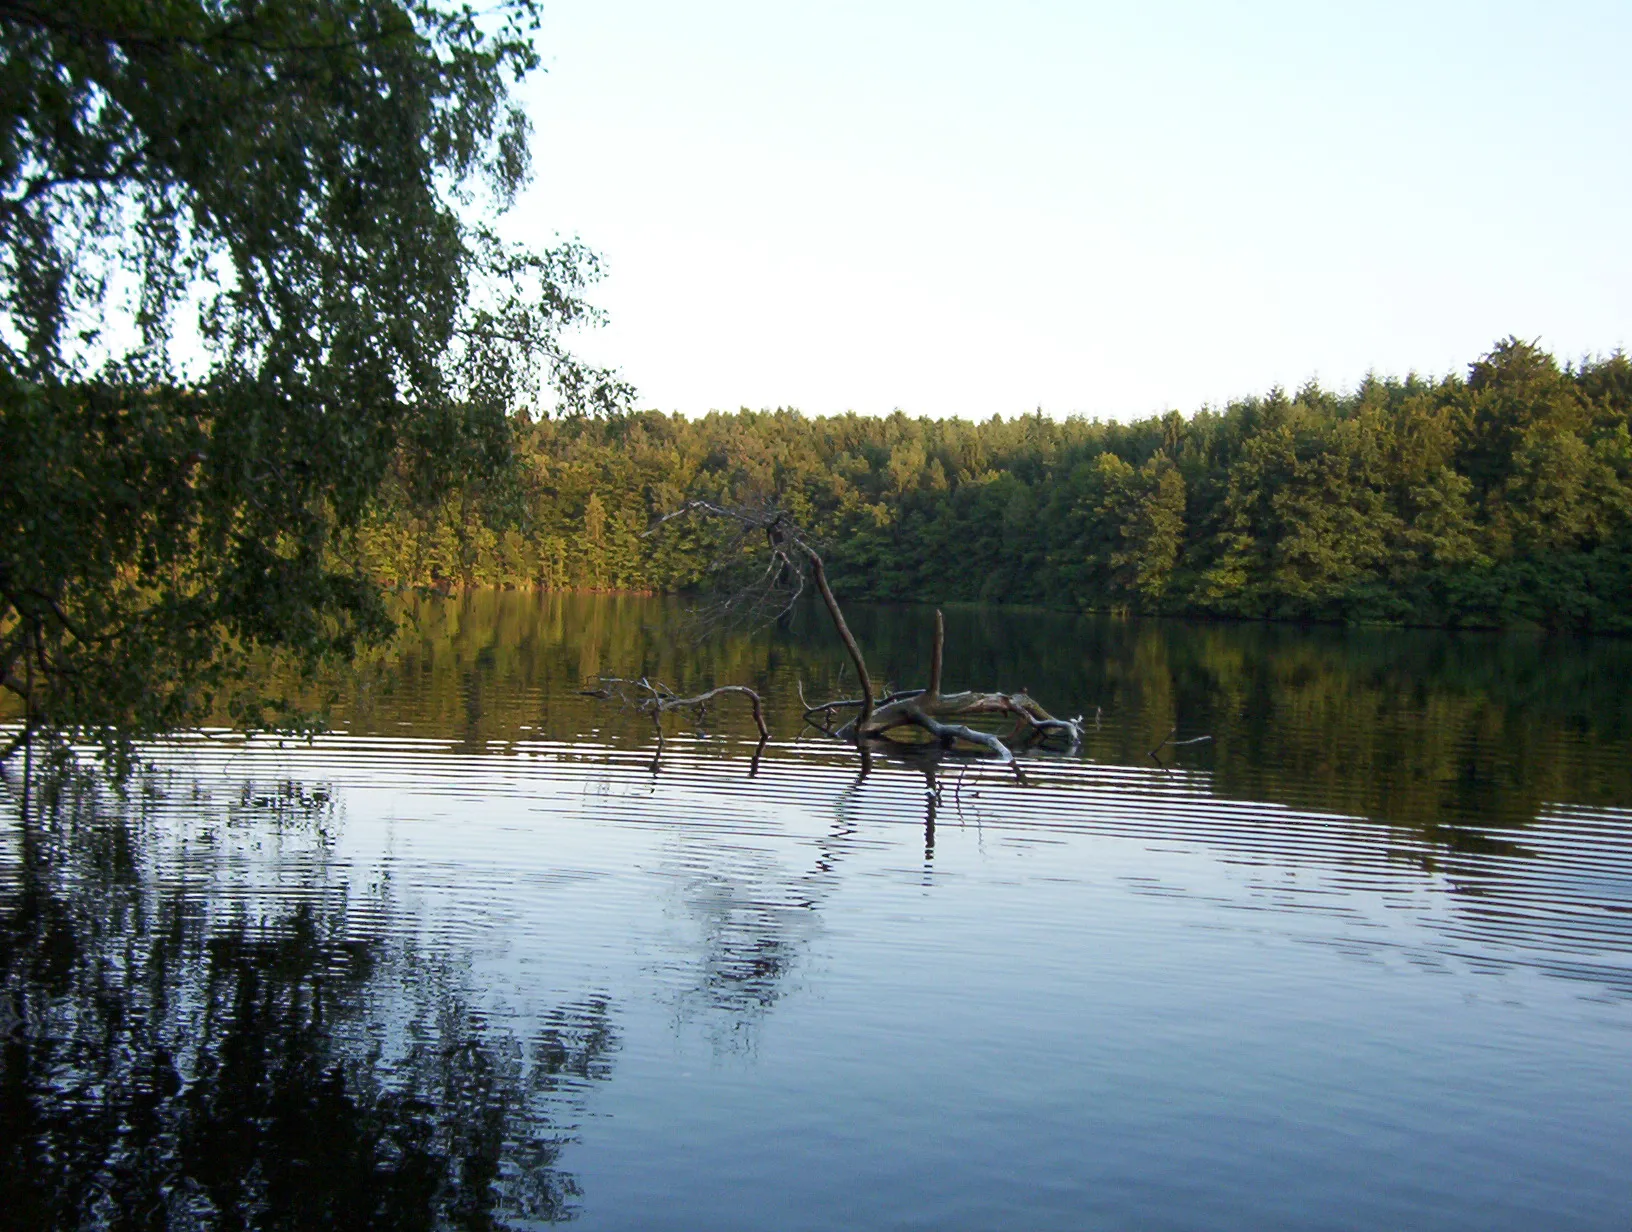 Photo showing: The Pinnsee lake near Mölln in Schleswig-Holstein, Germany